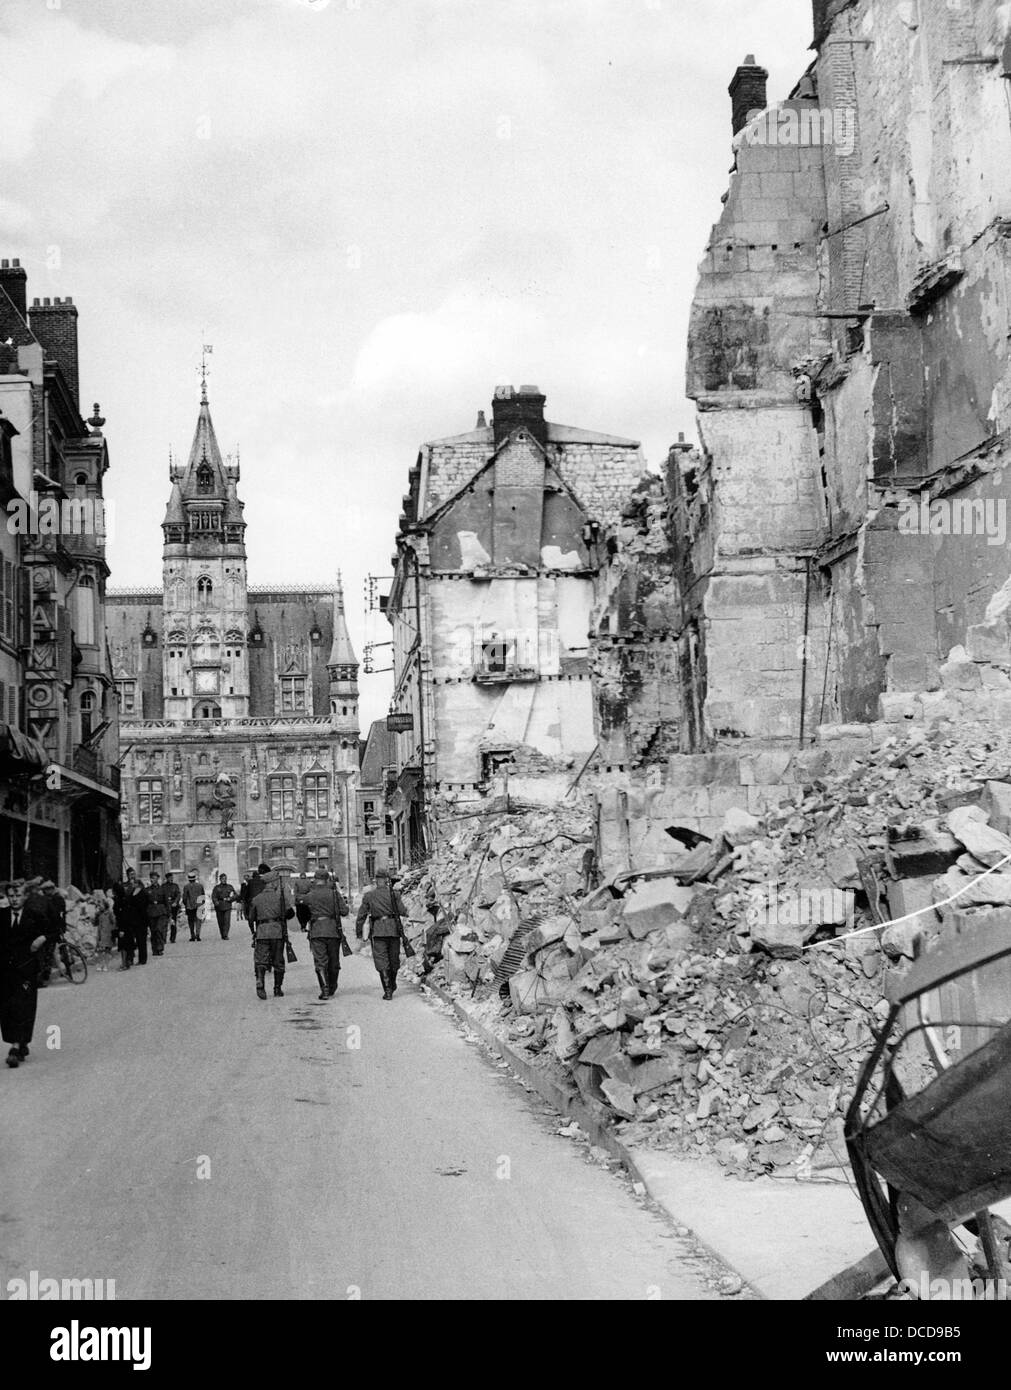 The image from the Nazi Proganda! shows the city of Compiègne in France, which was destroyed during the invasion of the German troops, 20 August 1940. In the background, the city hall is pictured. Fotoarchiv für Zeitgeschichte Stock Photo